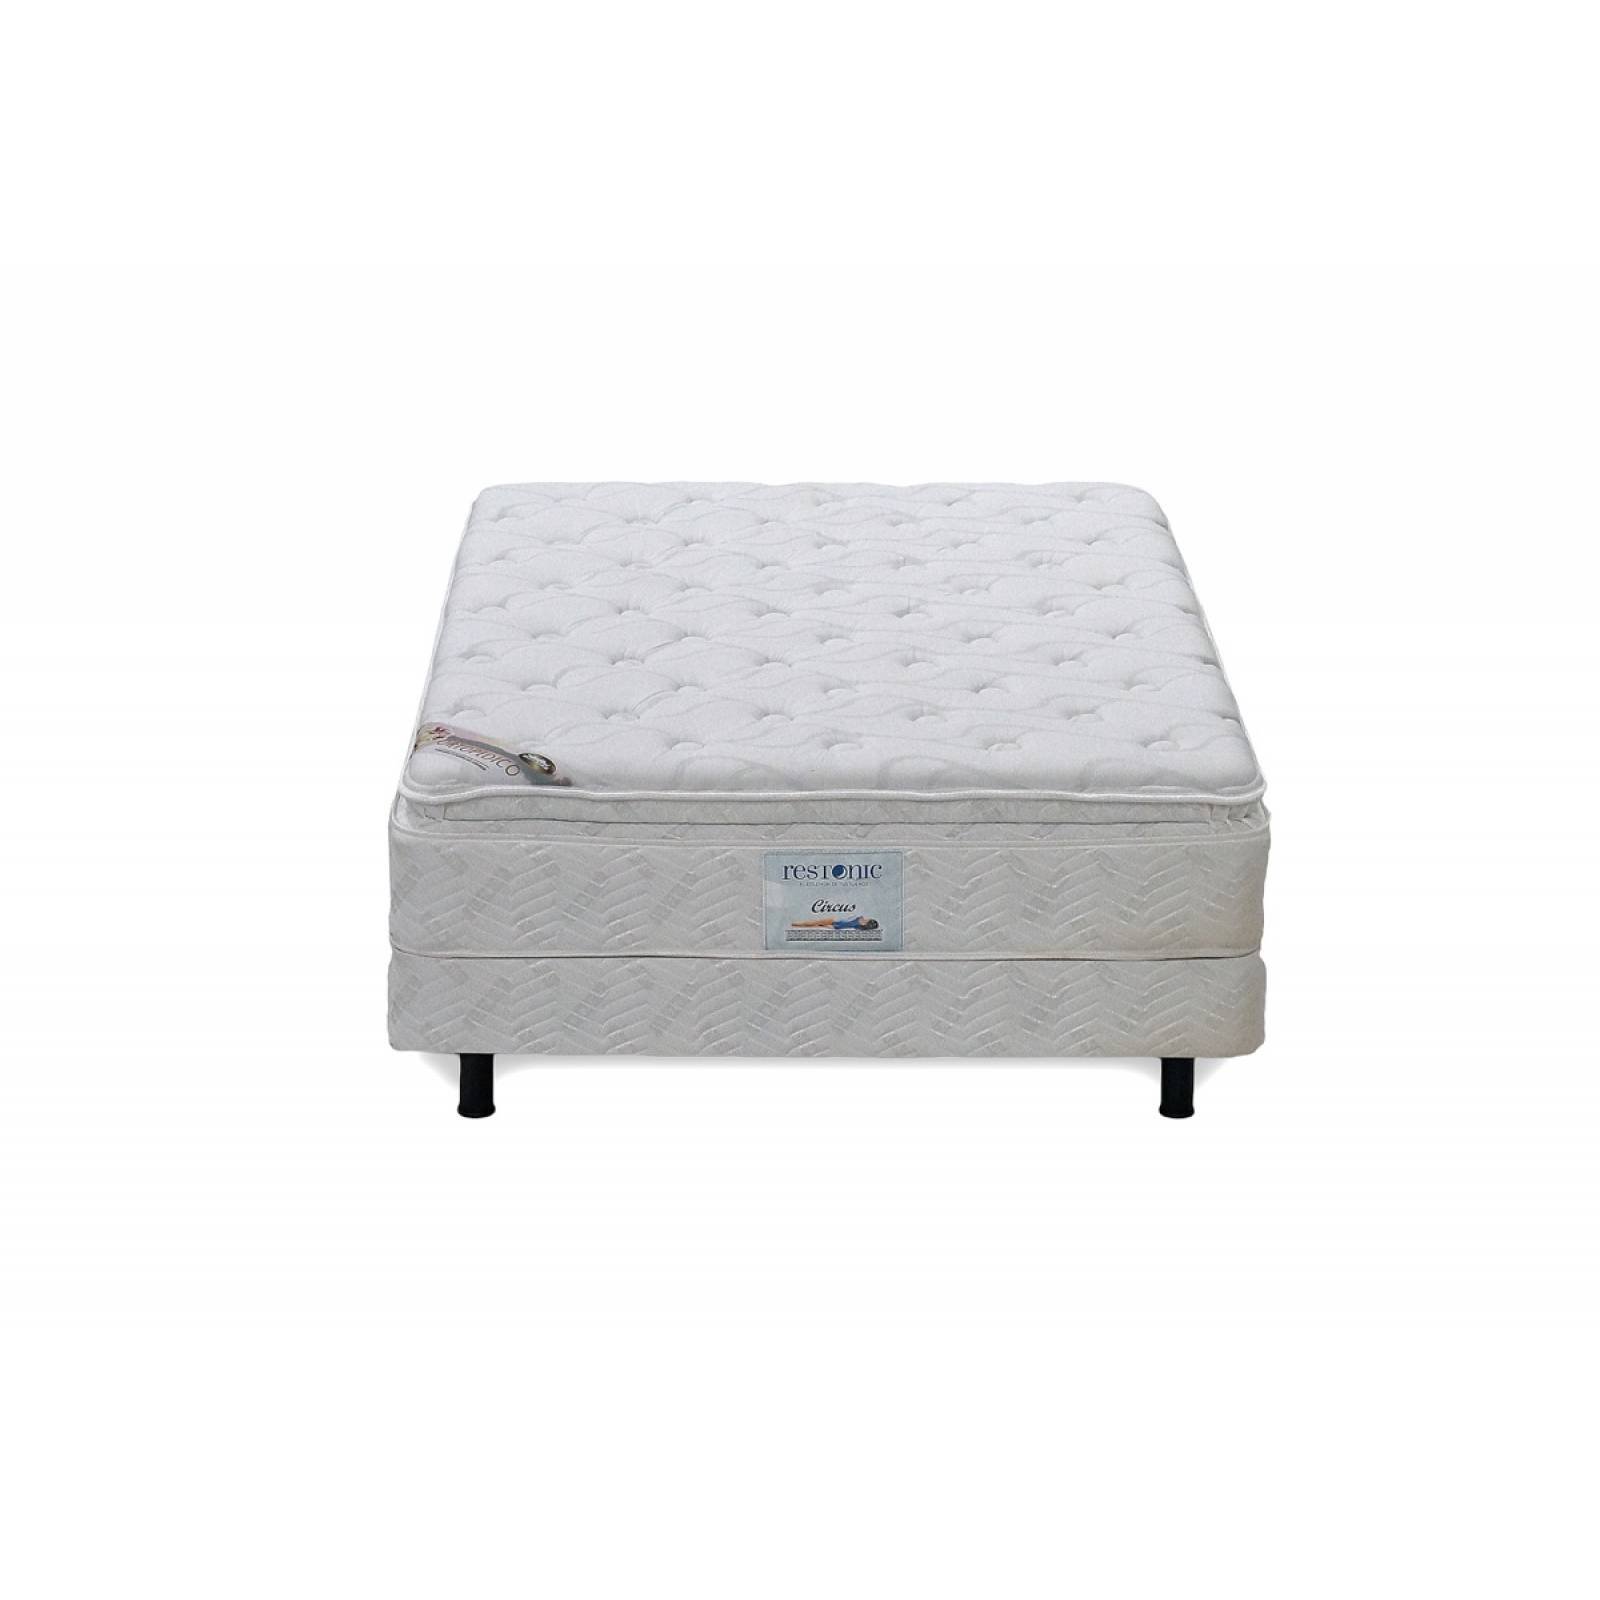 COLCHON CIRCUS RESTONIC QUEEN SIZE